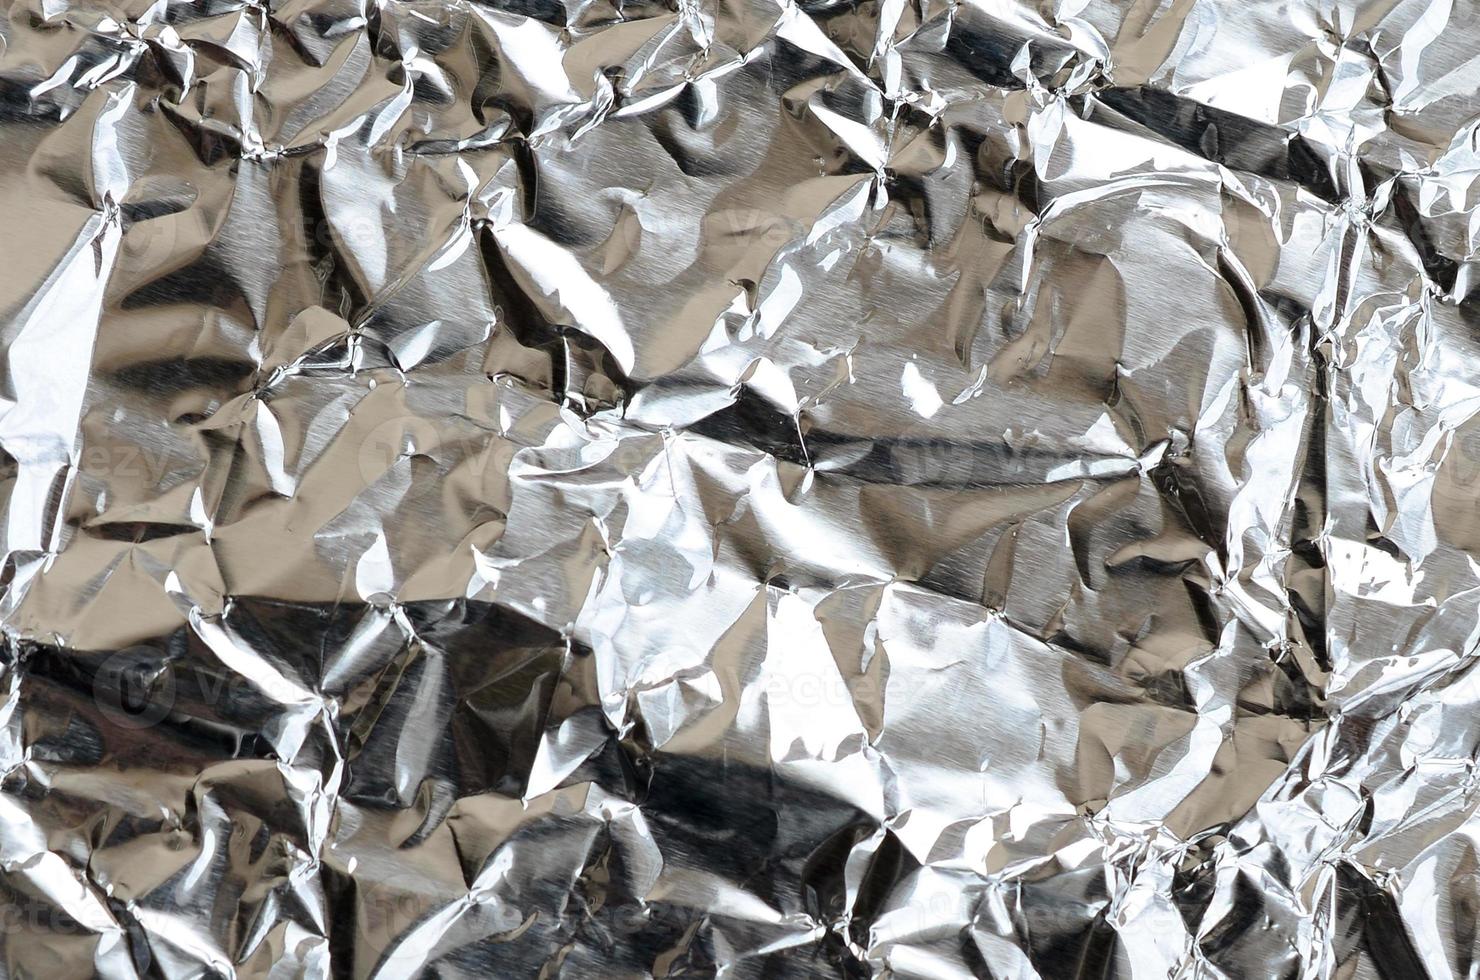 Thin wrinkled sheet of crushed tin aluminum silver foil background with shiny crumpled surface for texture photo